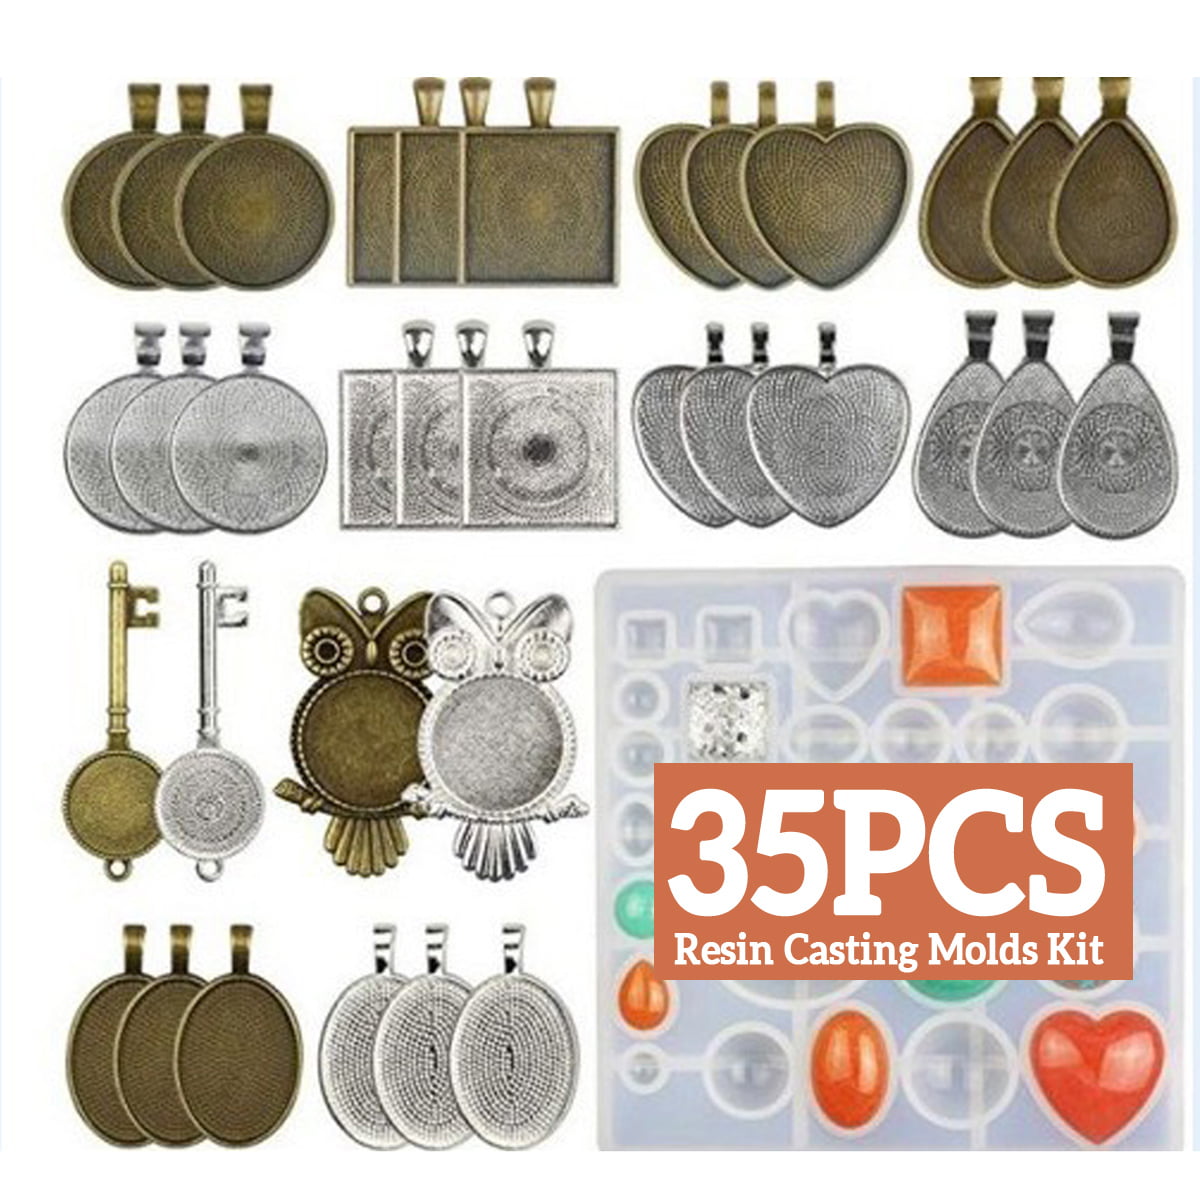 35Pcs/Set Resin Jewelry Casting Silicone Mold DIY Crafting Pendant Trays Making 